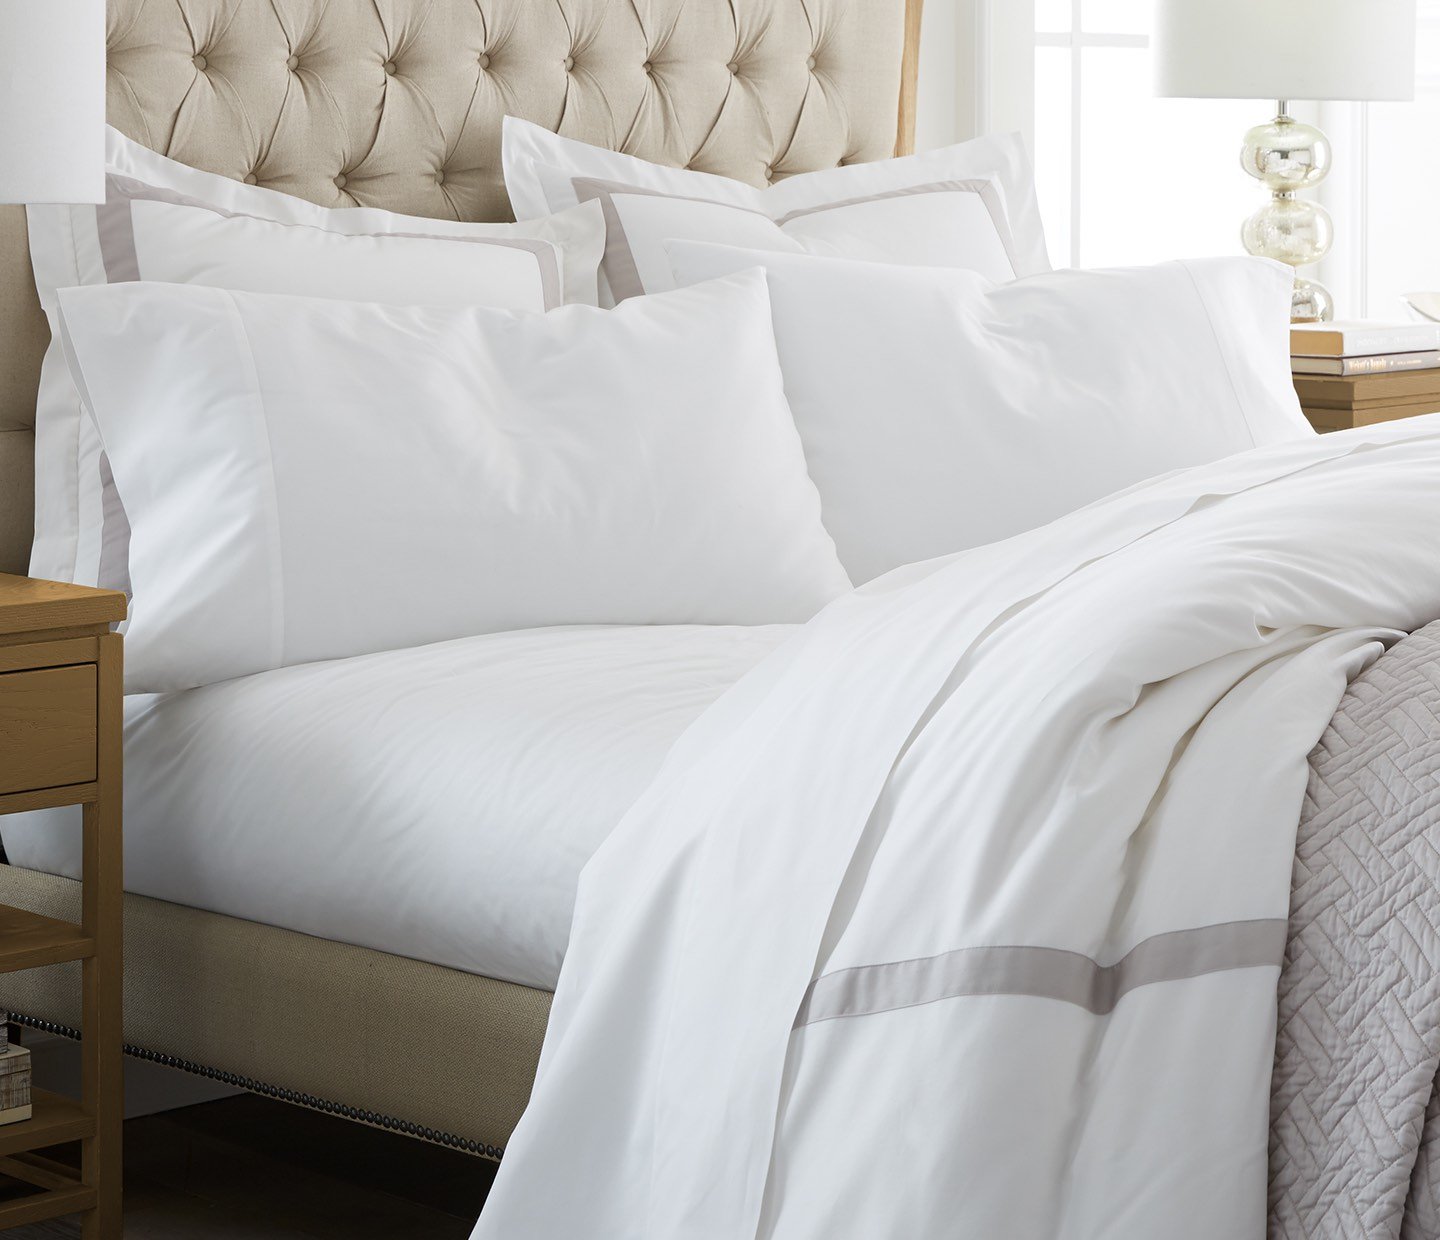 a bed with white sheets and duvet cover